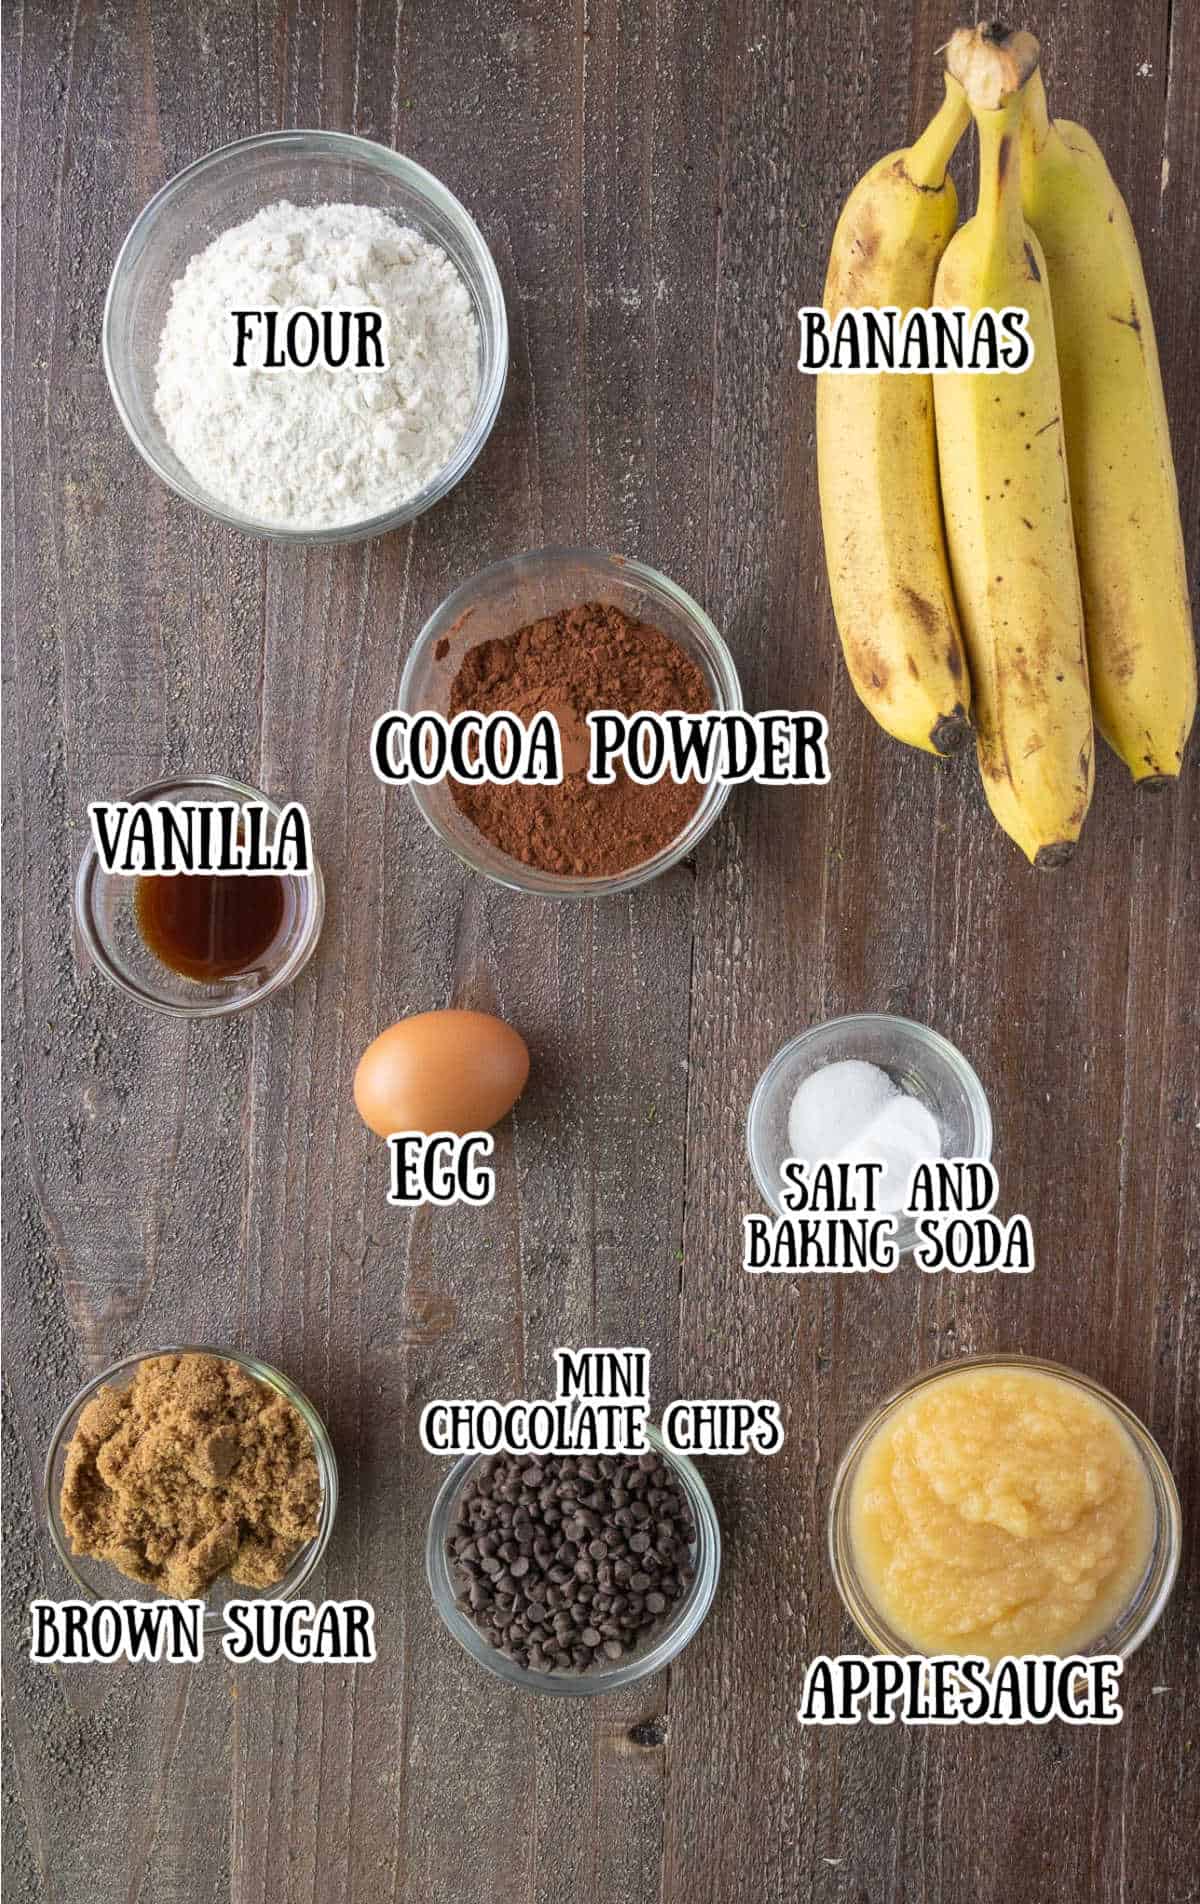 All the ingredients needed for this banana cake.